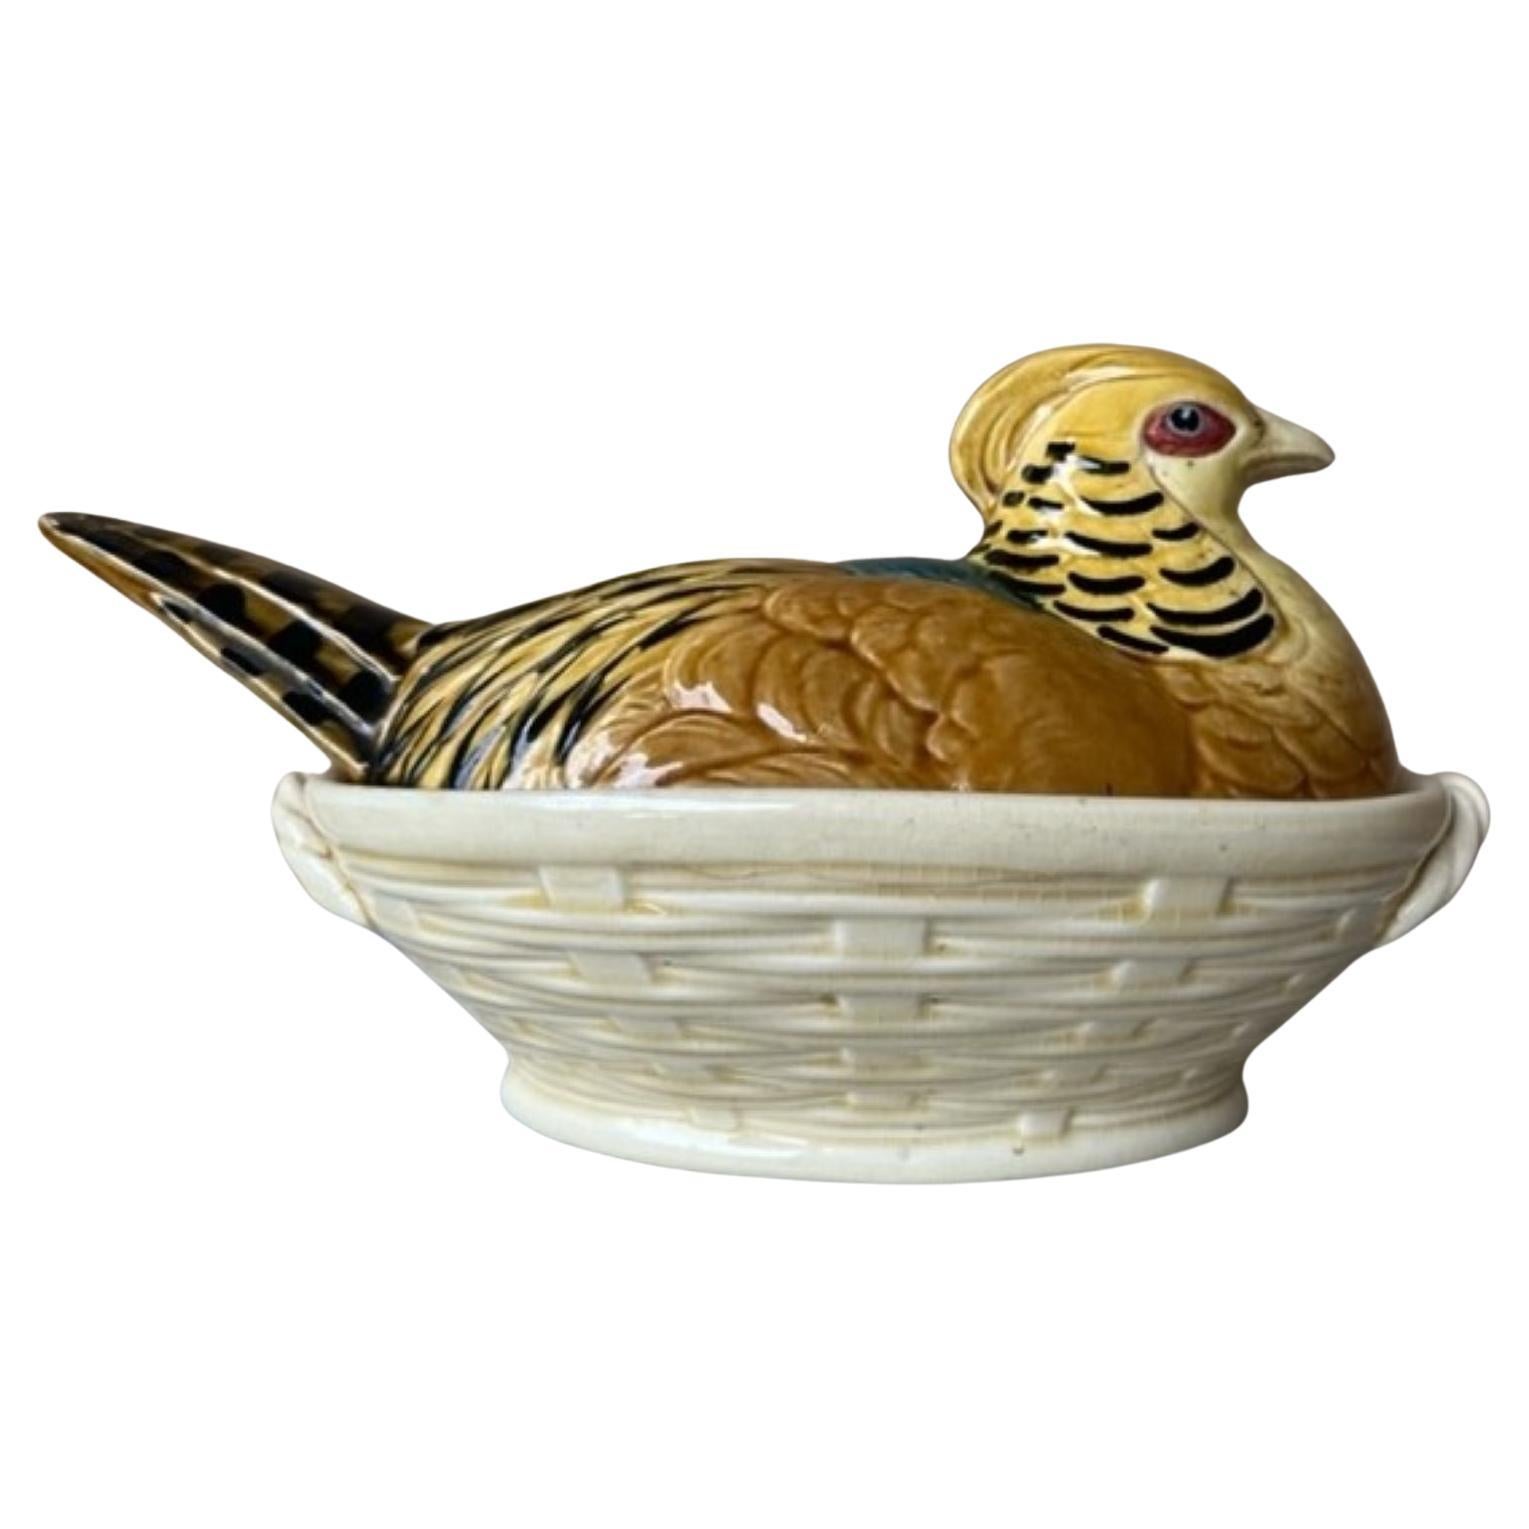 Brightly colored French majolica tureen of a pheasant hen on a basket by Sarreguemines, made in the late 19th to early 20th century.

Sarreguemines France & K are stamped on the bottom.